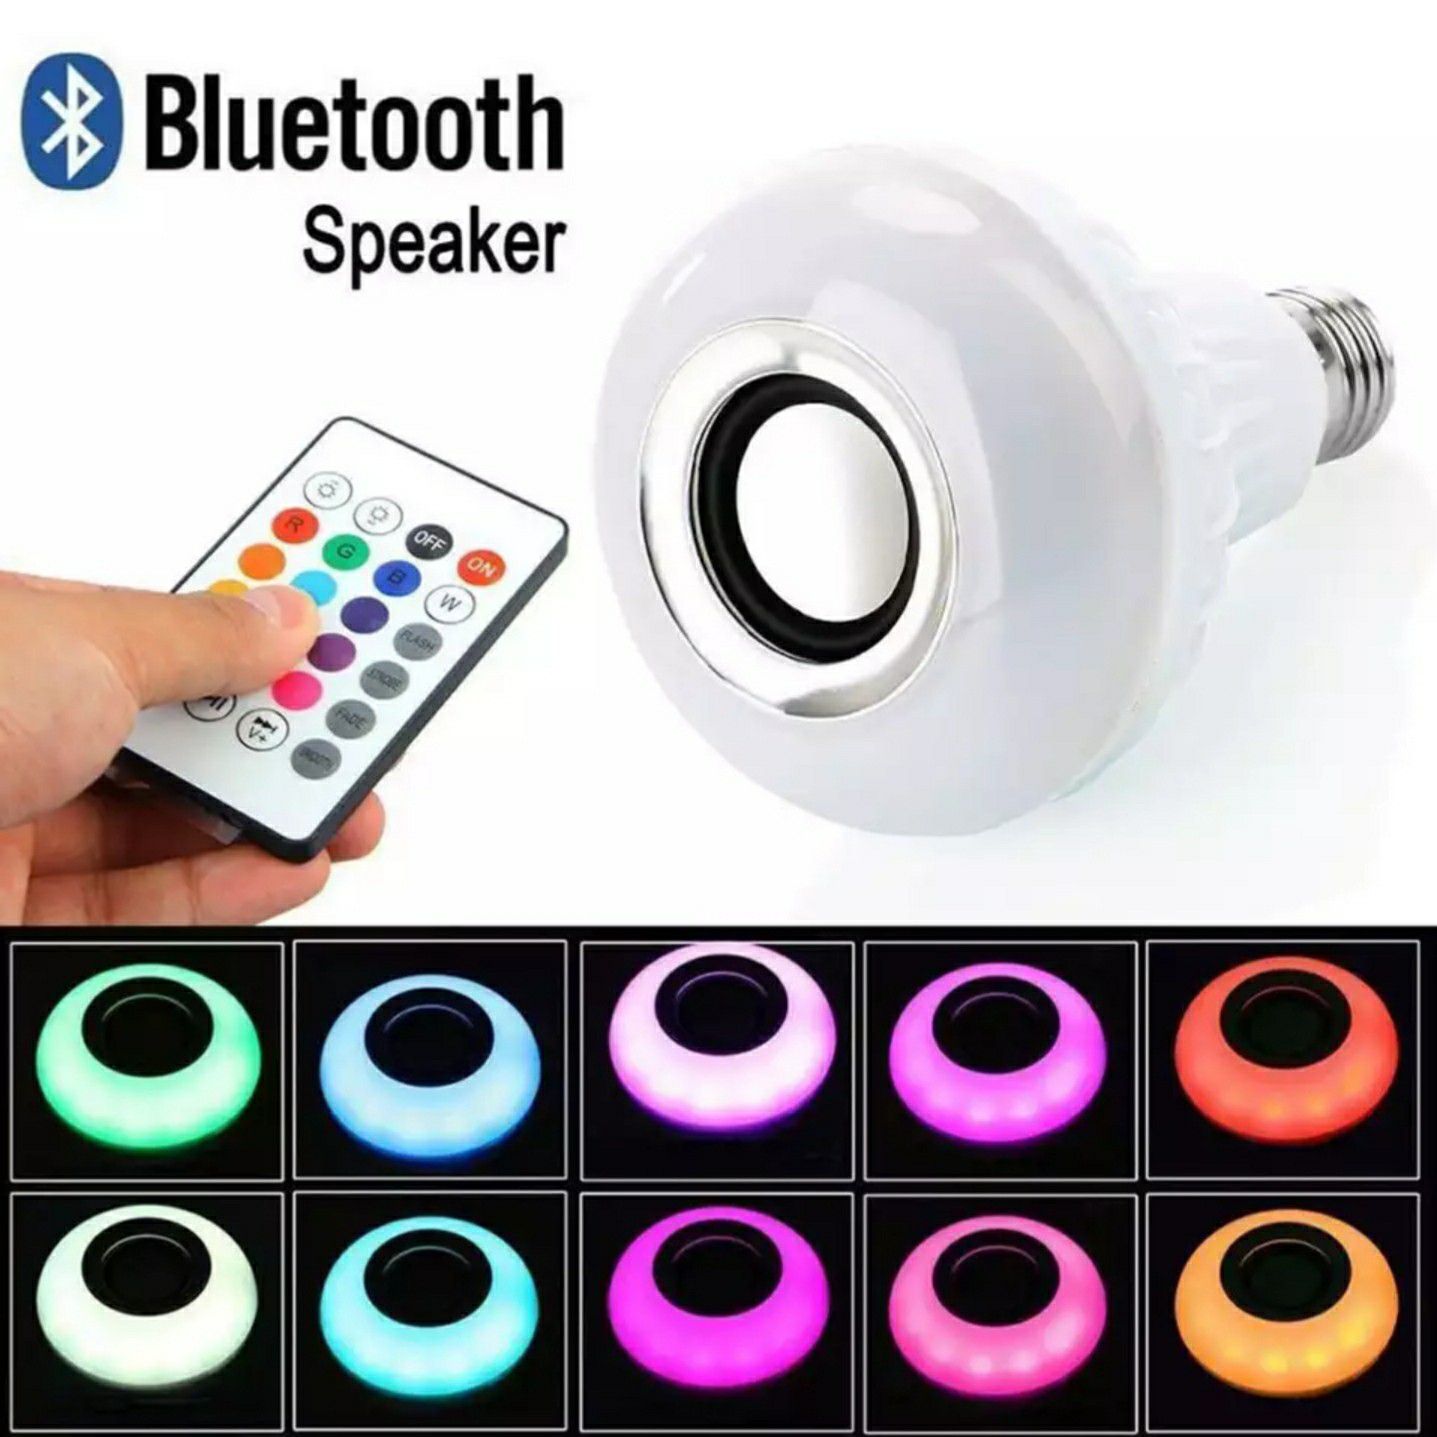 Led Bluetooth speaker bulb with remote. Changes colors while playing music.